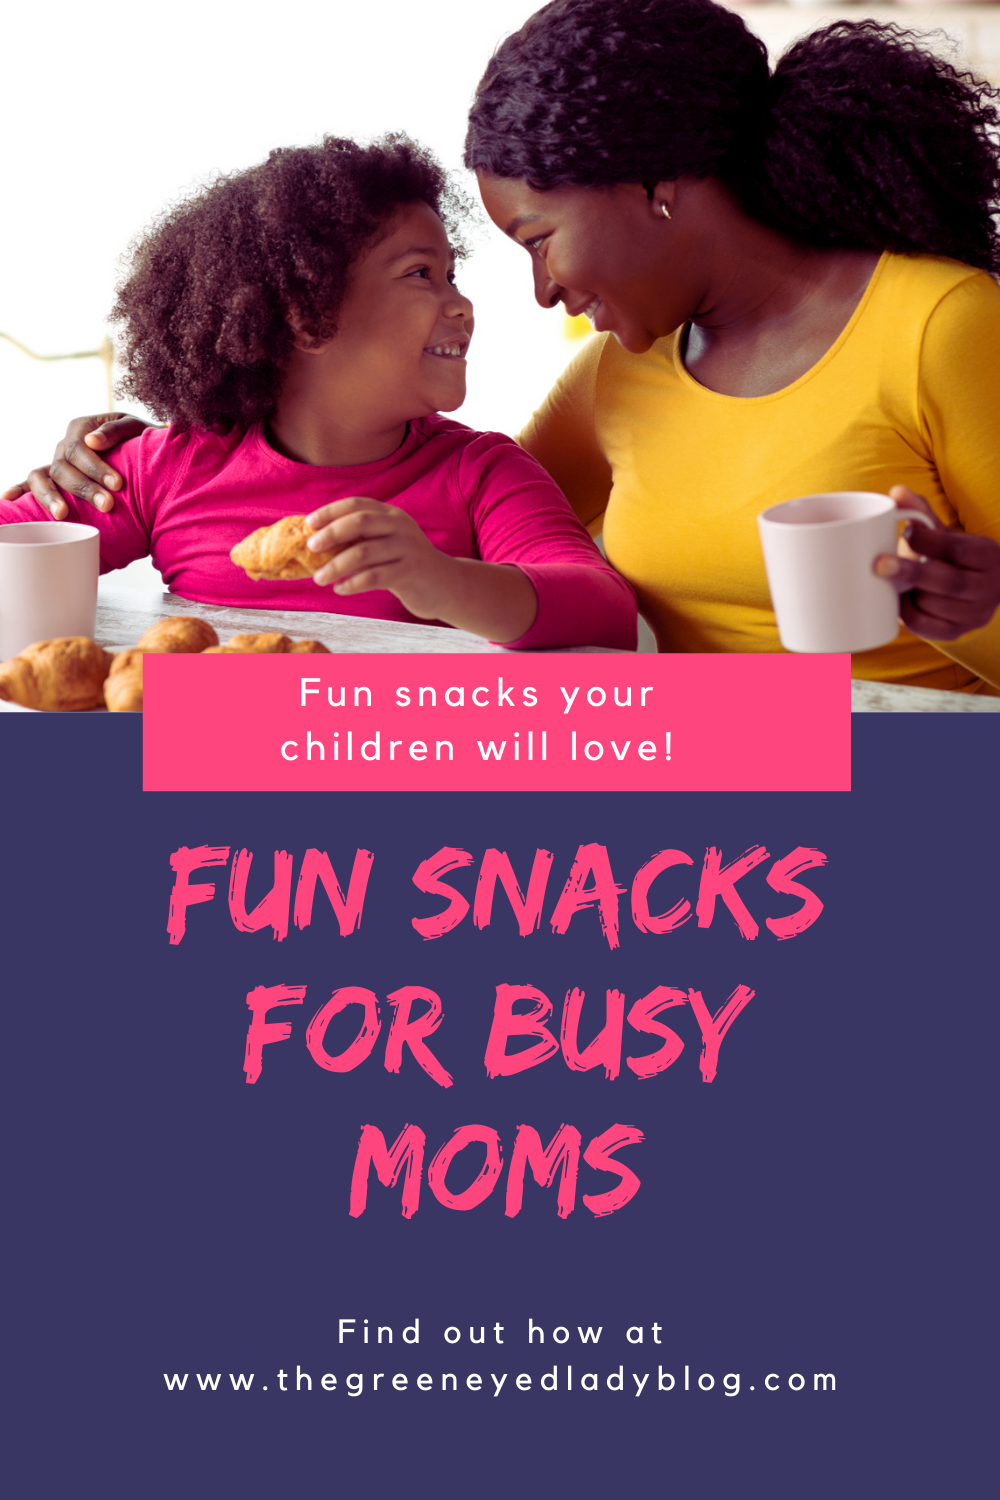 Fun Snacks for Busy Moms